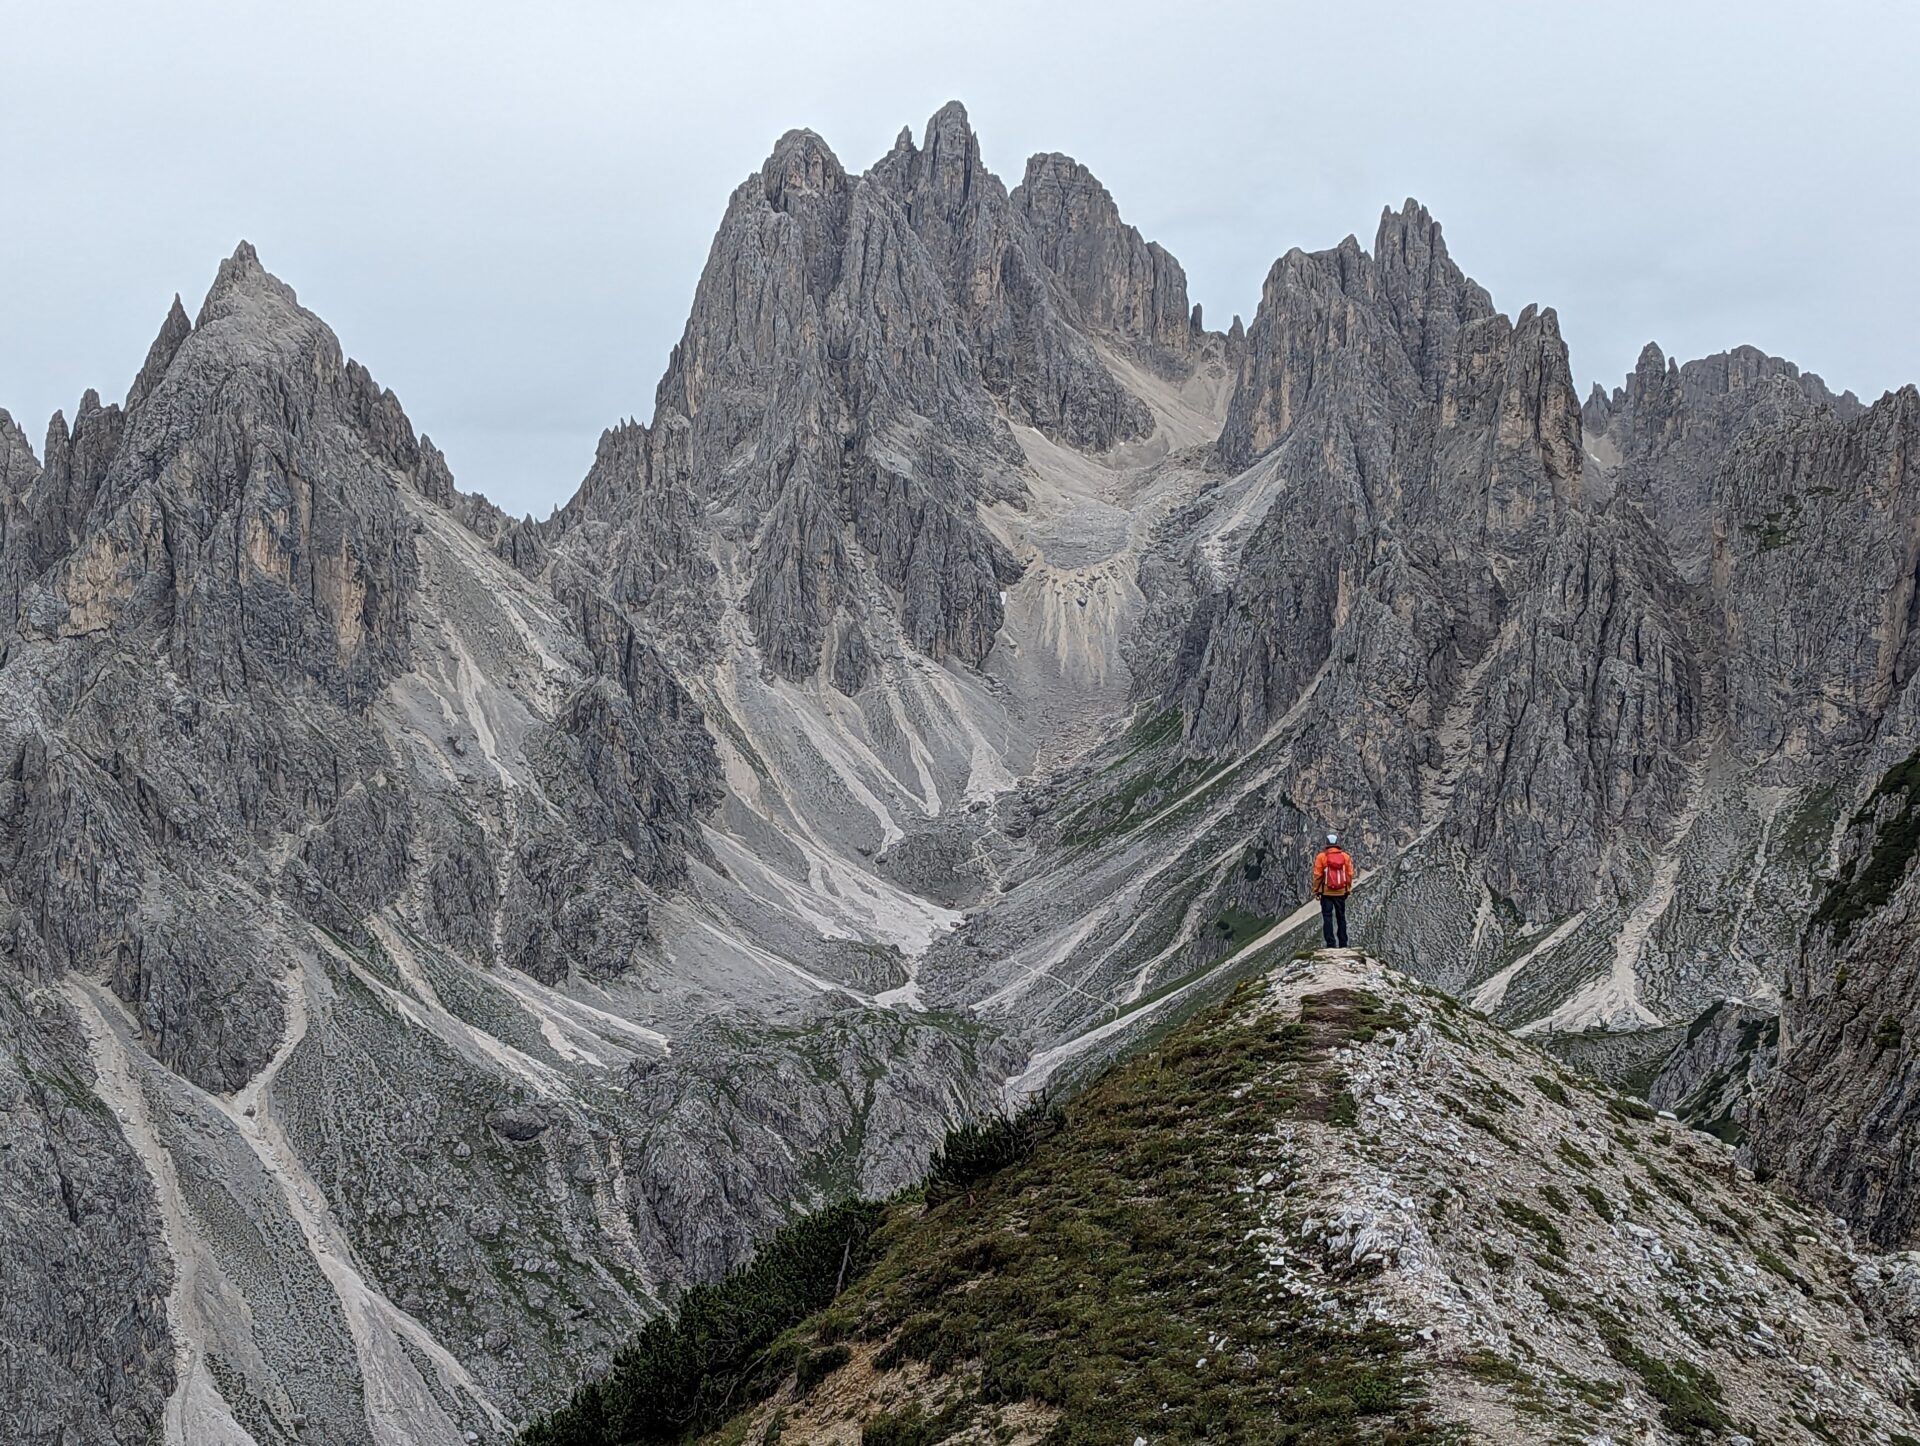 A hiker standing on a point looking at the jagged mountains of Cadini di Misurina